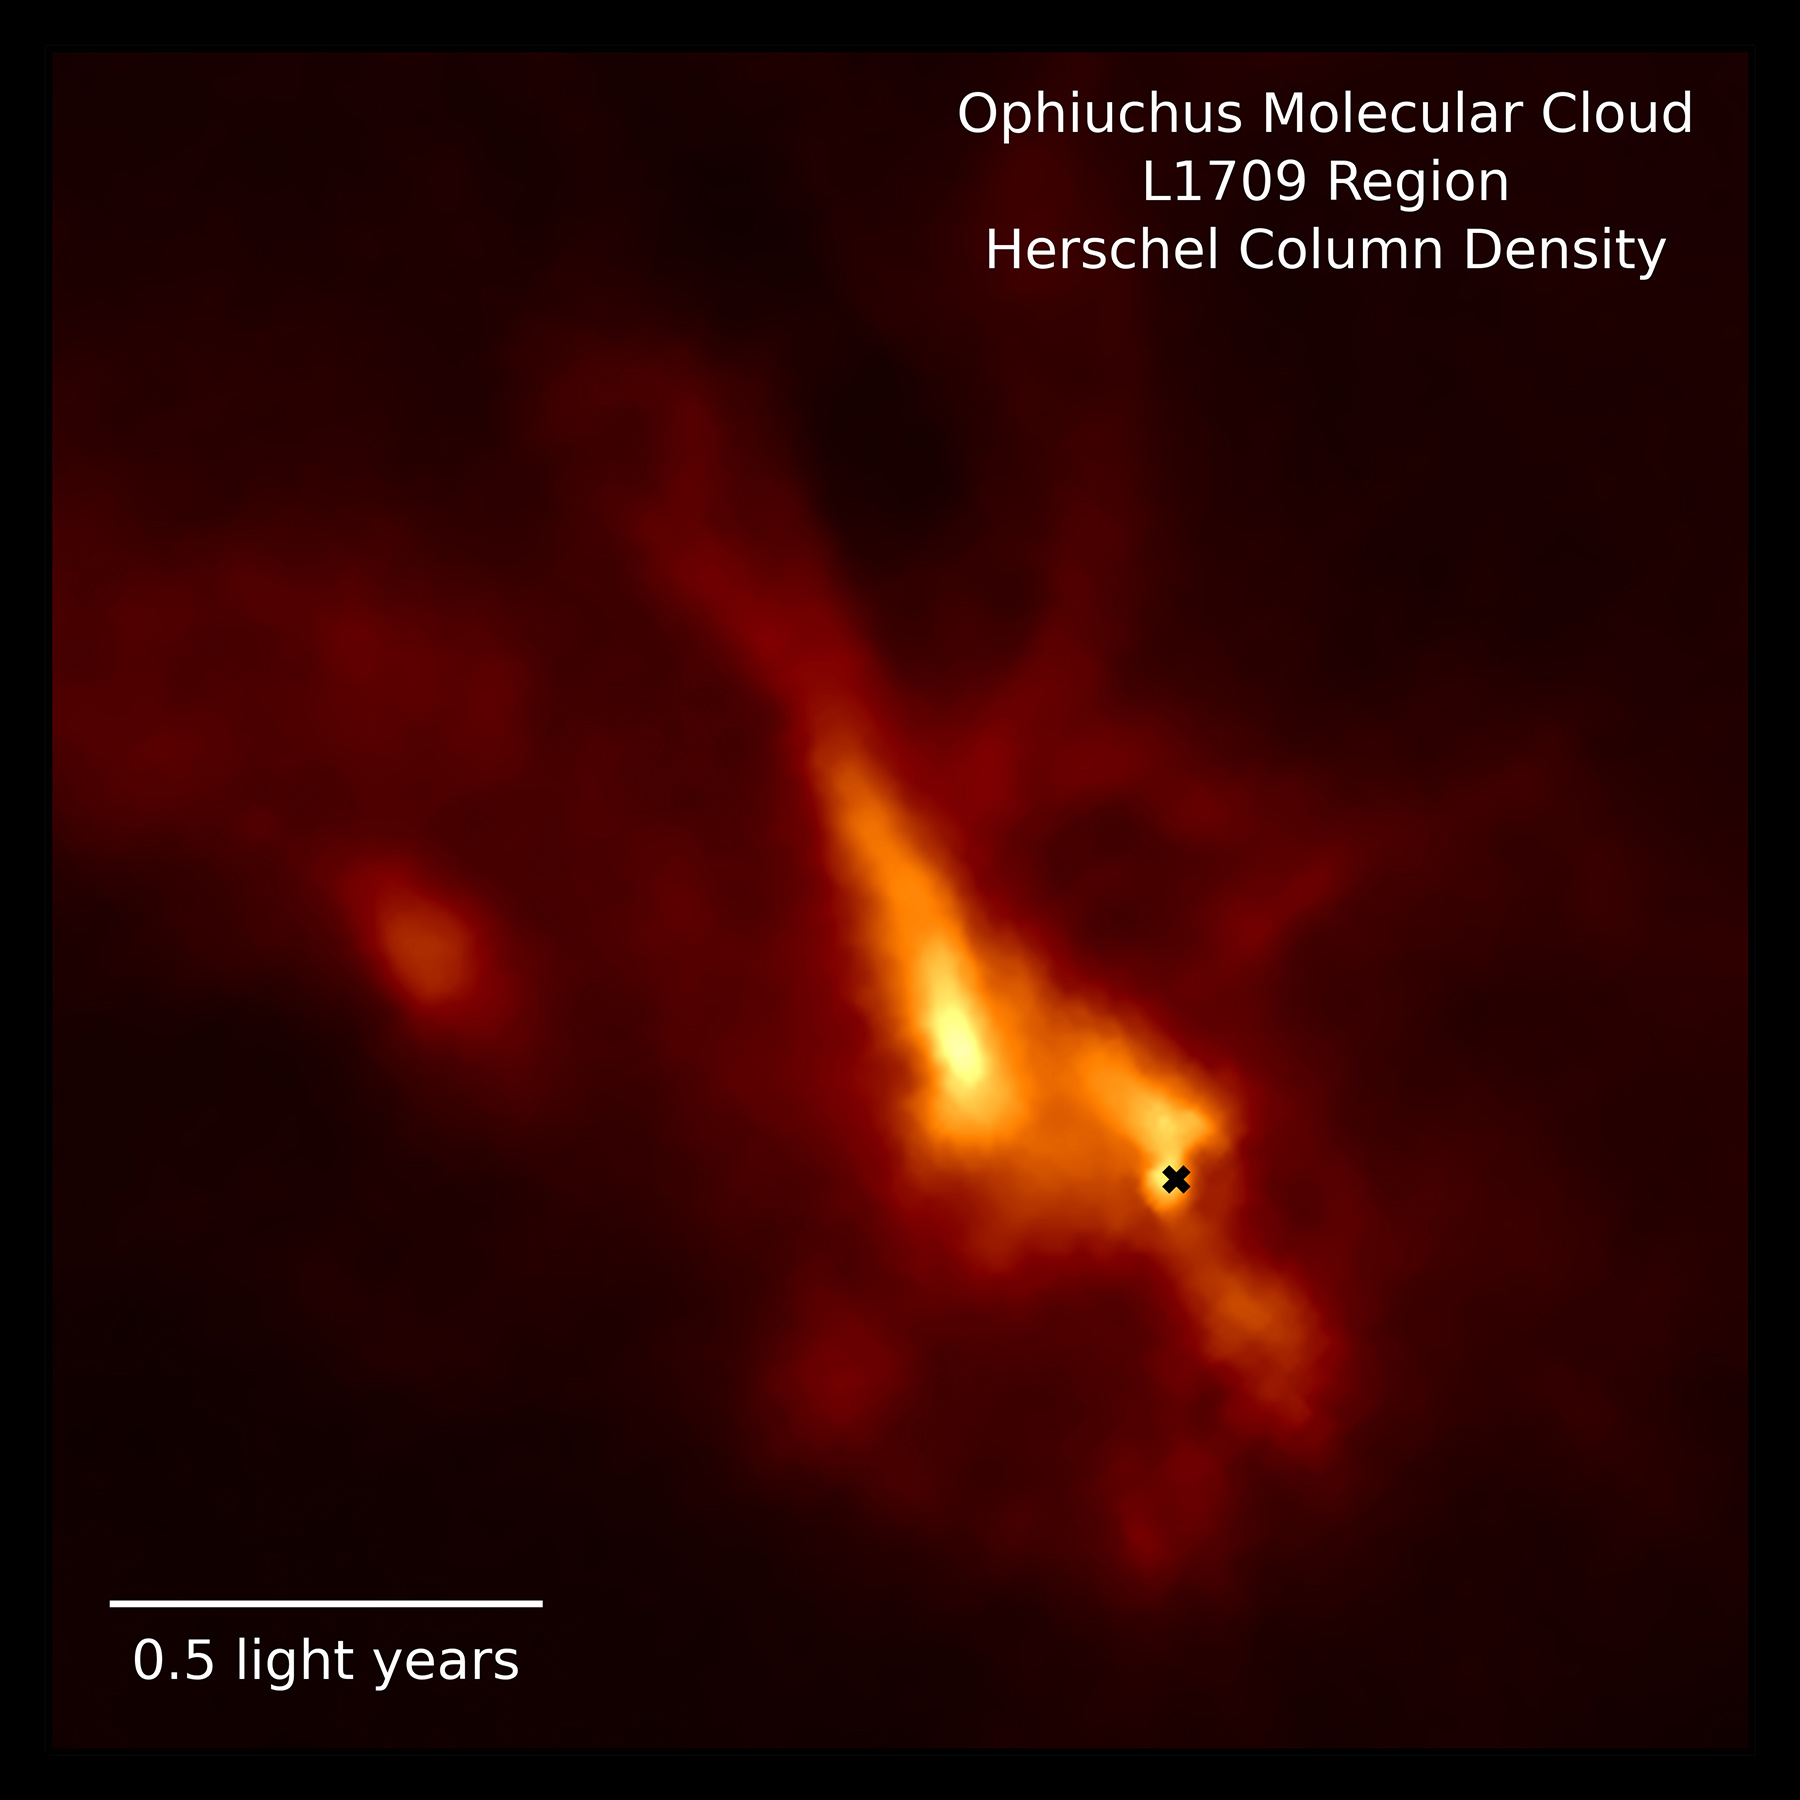 The dense L1709 region of the Ophiuchus Molecular Cloud mapped by the Herschel Space Telescope, which surrounds and feeds material to the much smaller IRS 63 protostar and planet-forming disk (location marked by the black x).&nbsp;